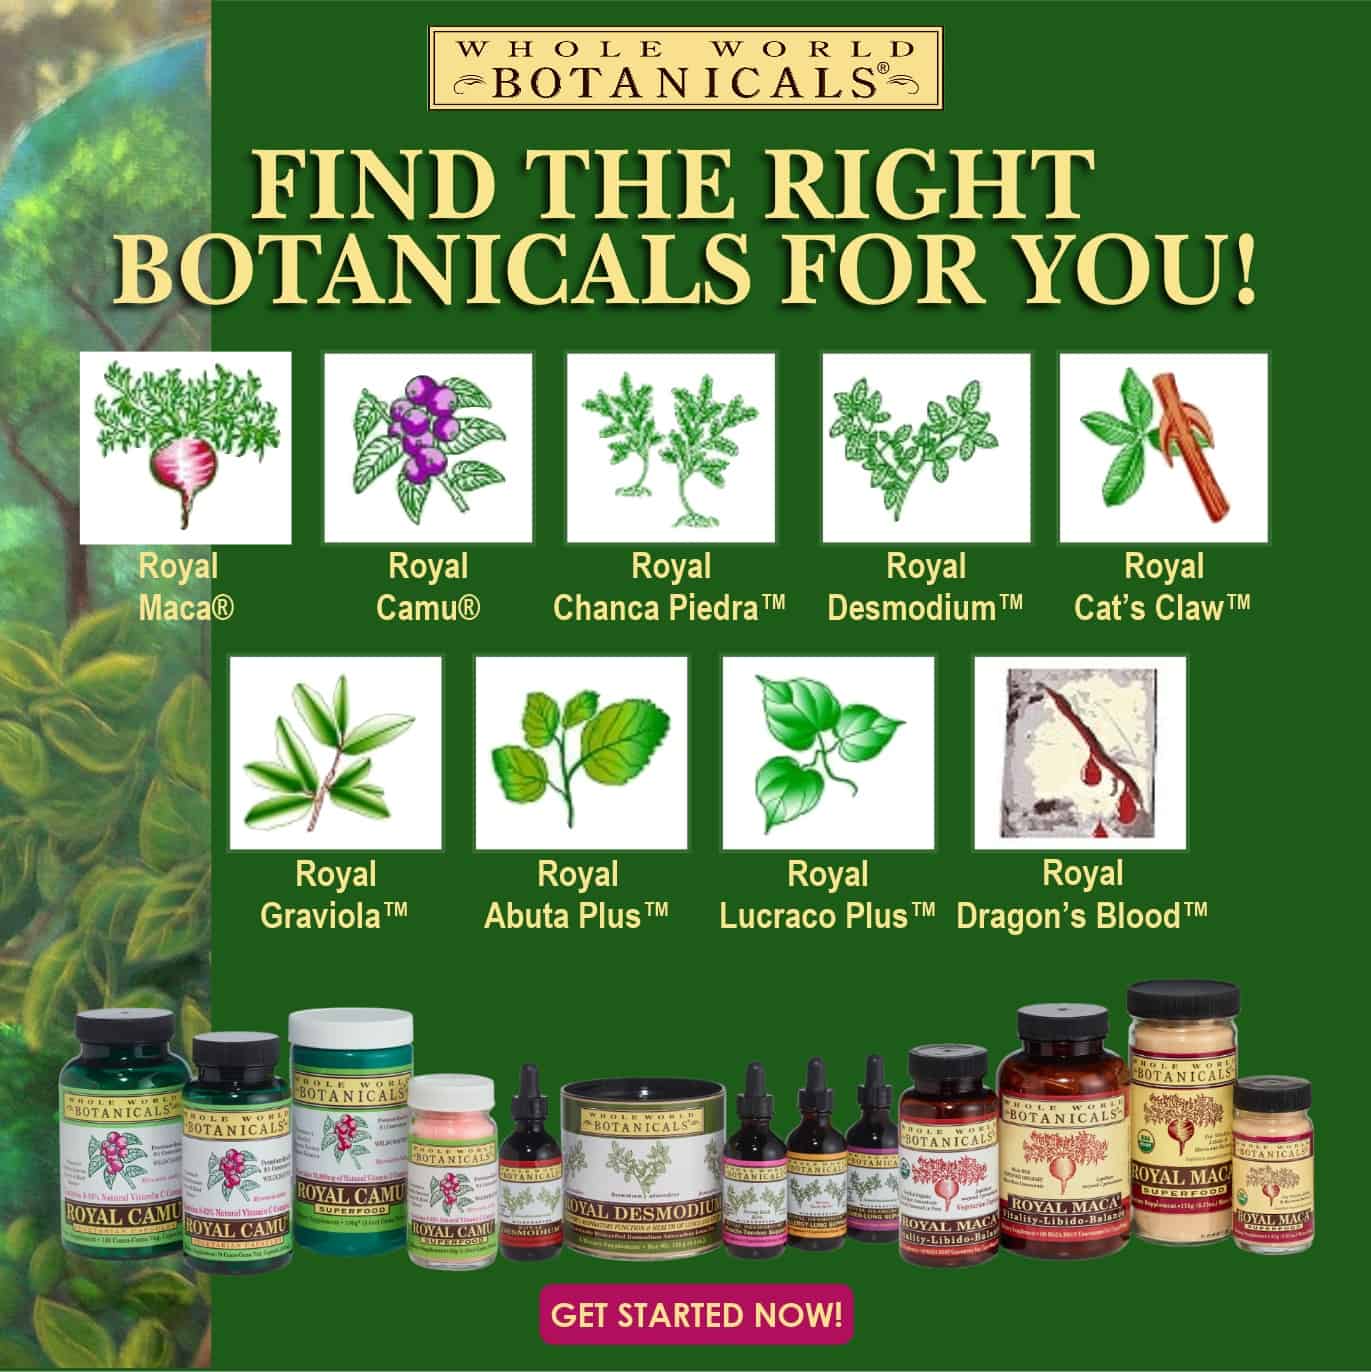 Find the Right Botanicals